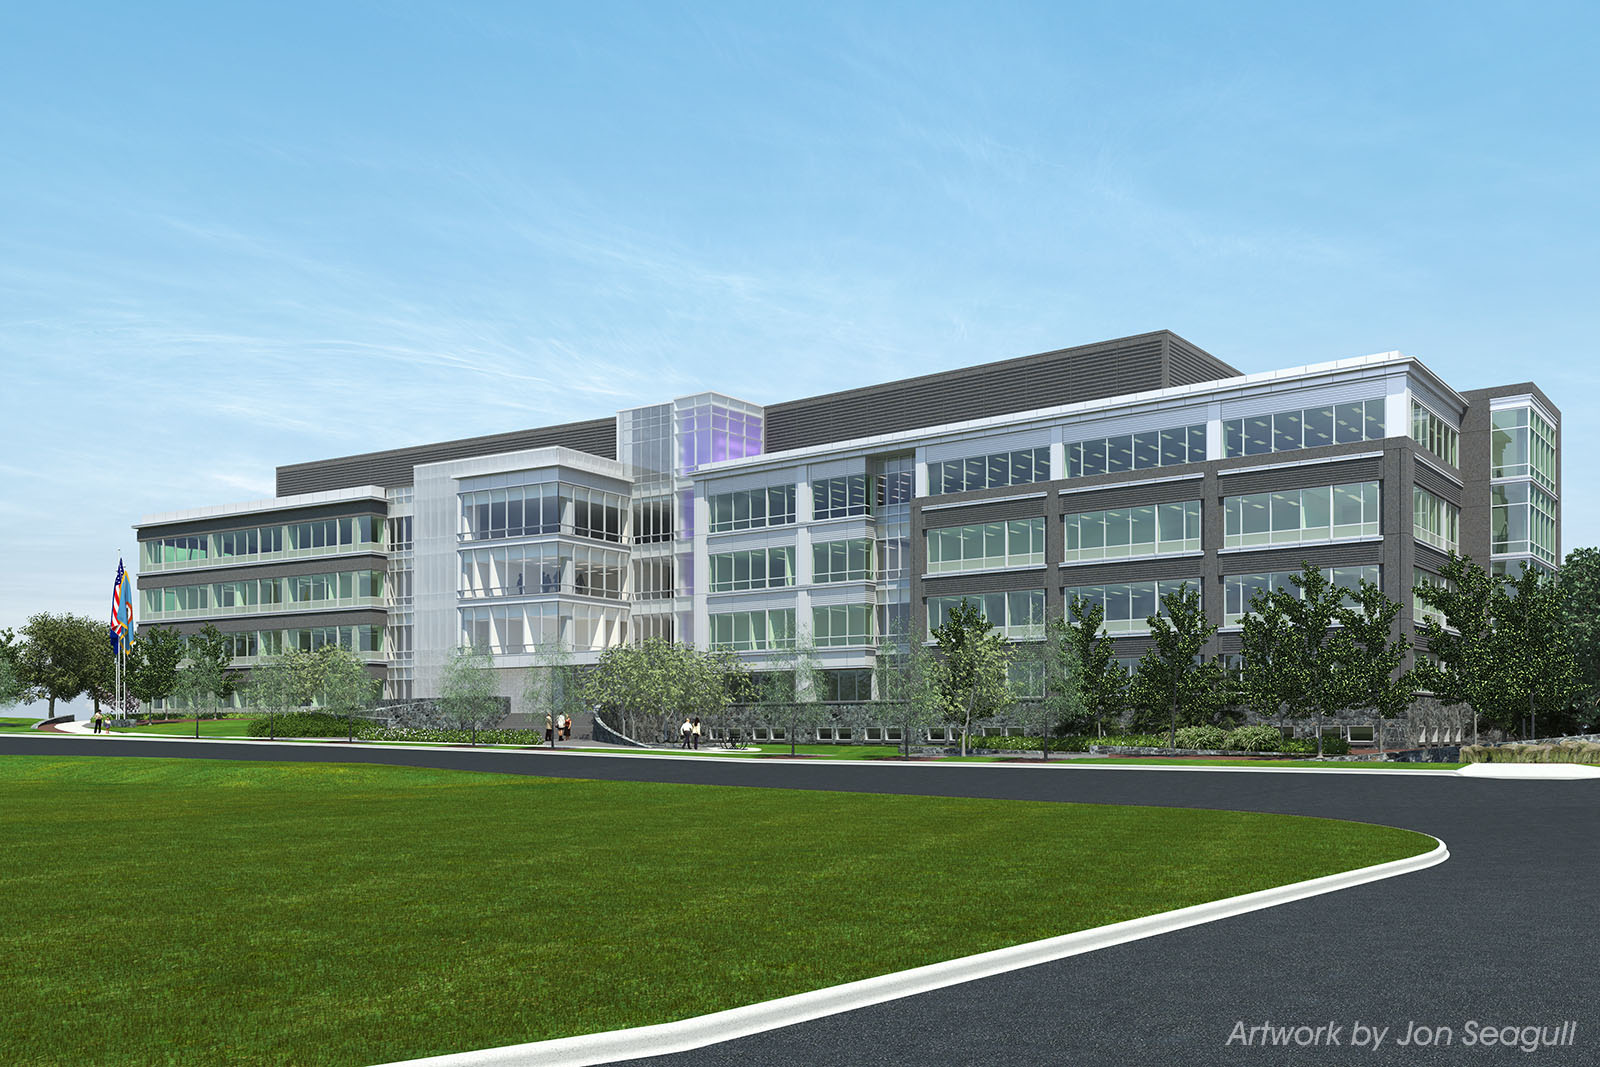 Fairfaxs new building will house behavioral healthcare services of the Fairfax-